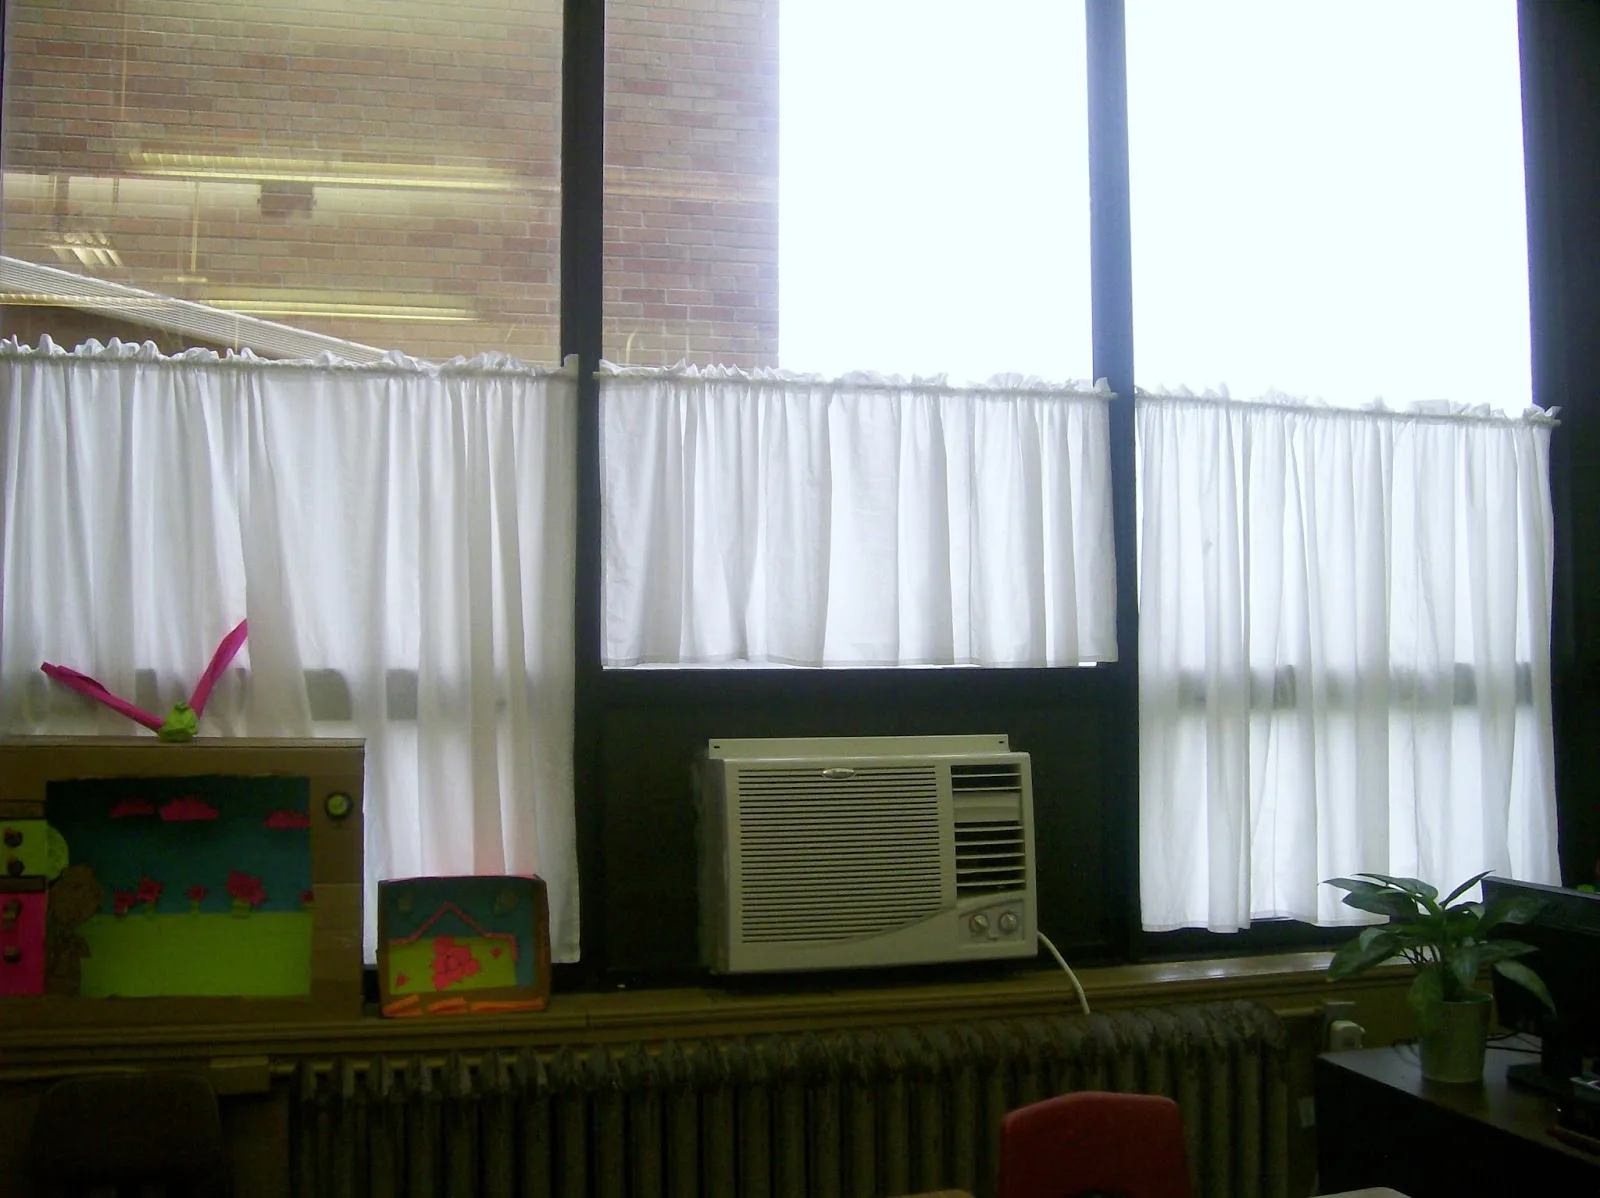 wall of windows in classroom with white curtains. 